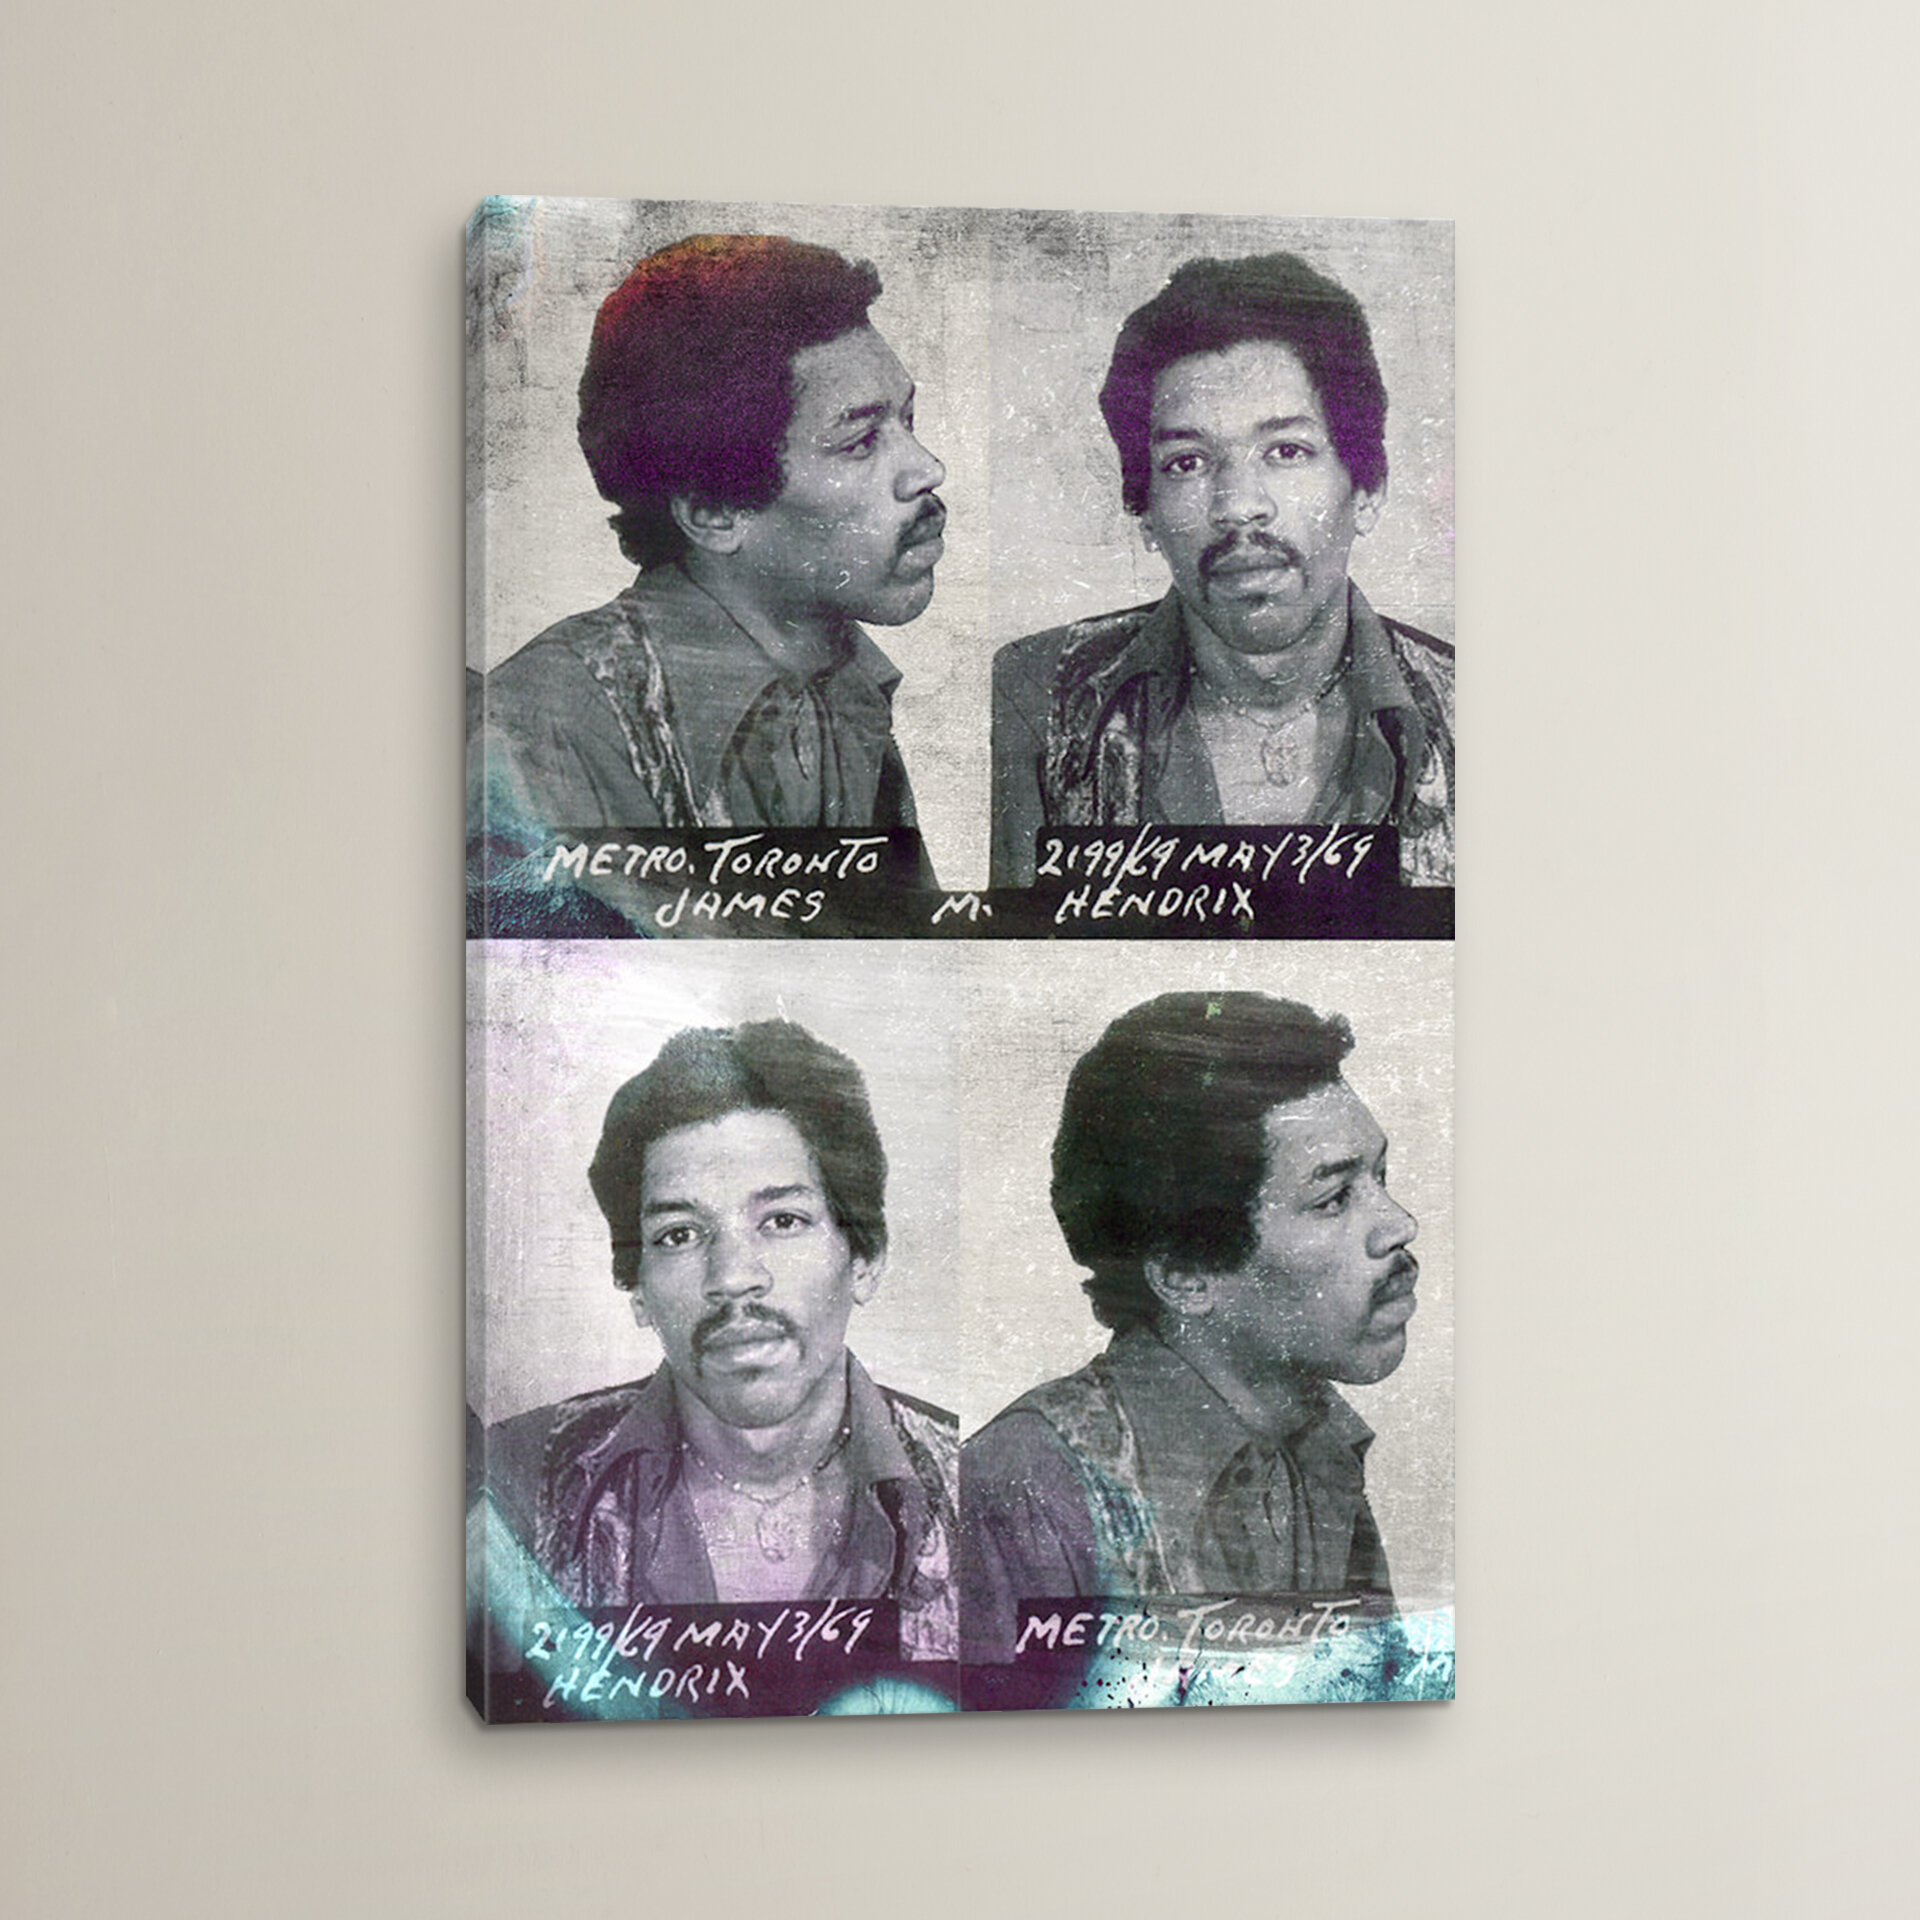 JIMI HENDRIX CANVAS PICTURE PRINT SKETCH WALL ART FREE FAST DELIVERY